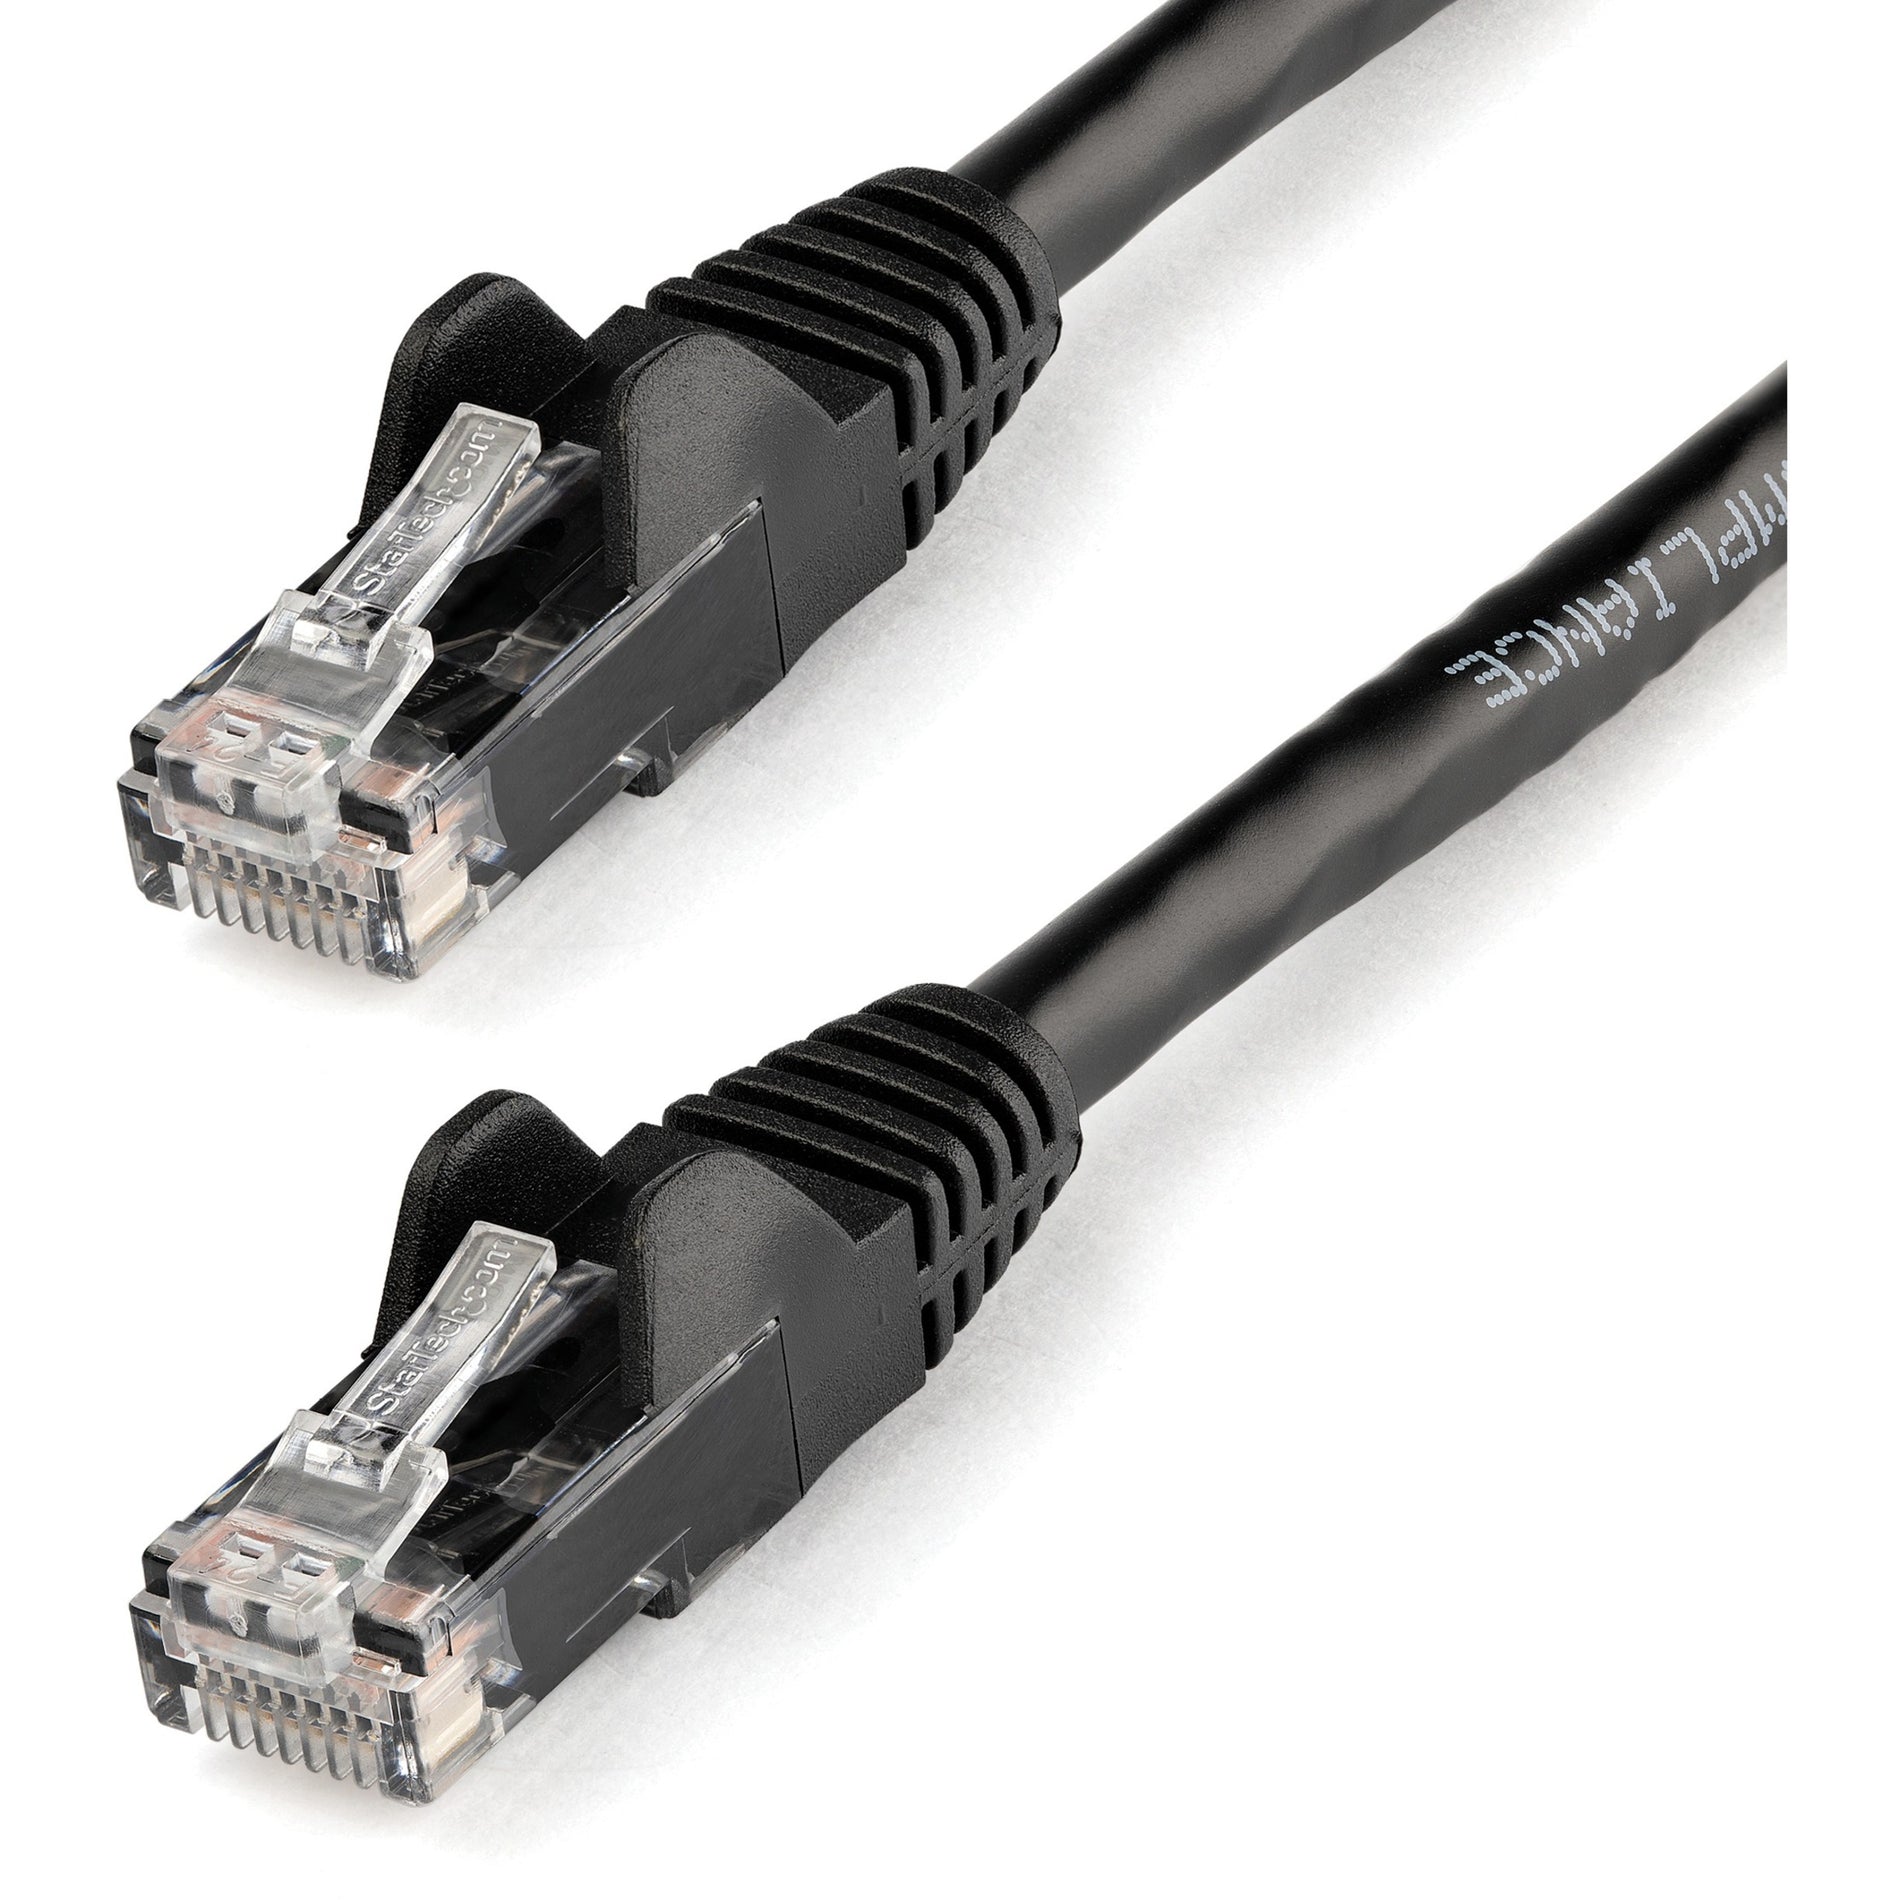 StarTech.com N6PATCH20BK Cable de red Cat. 6 20 pies Cable Ethernet negro Conectores RJ45 sin enganches